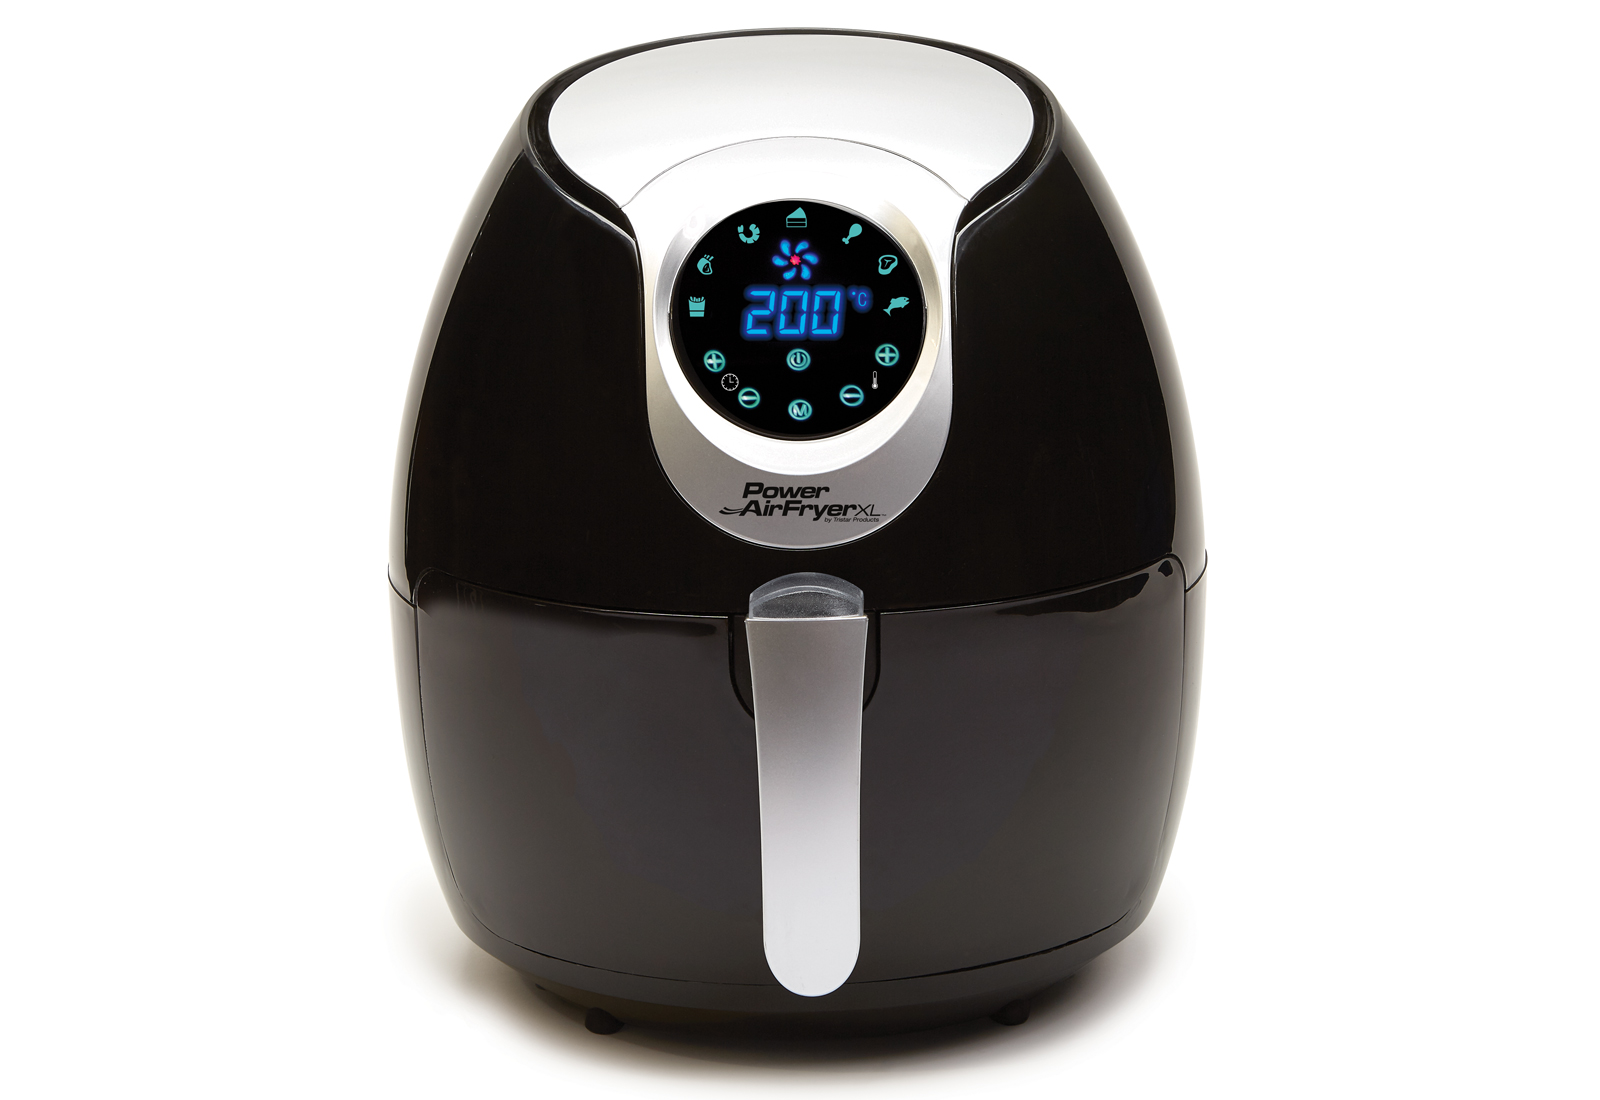 Power AirFryer XL 5.3qt Product Image